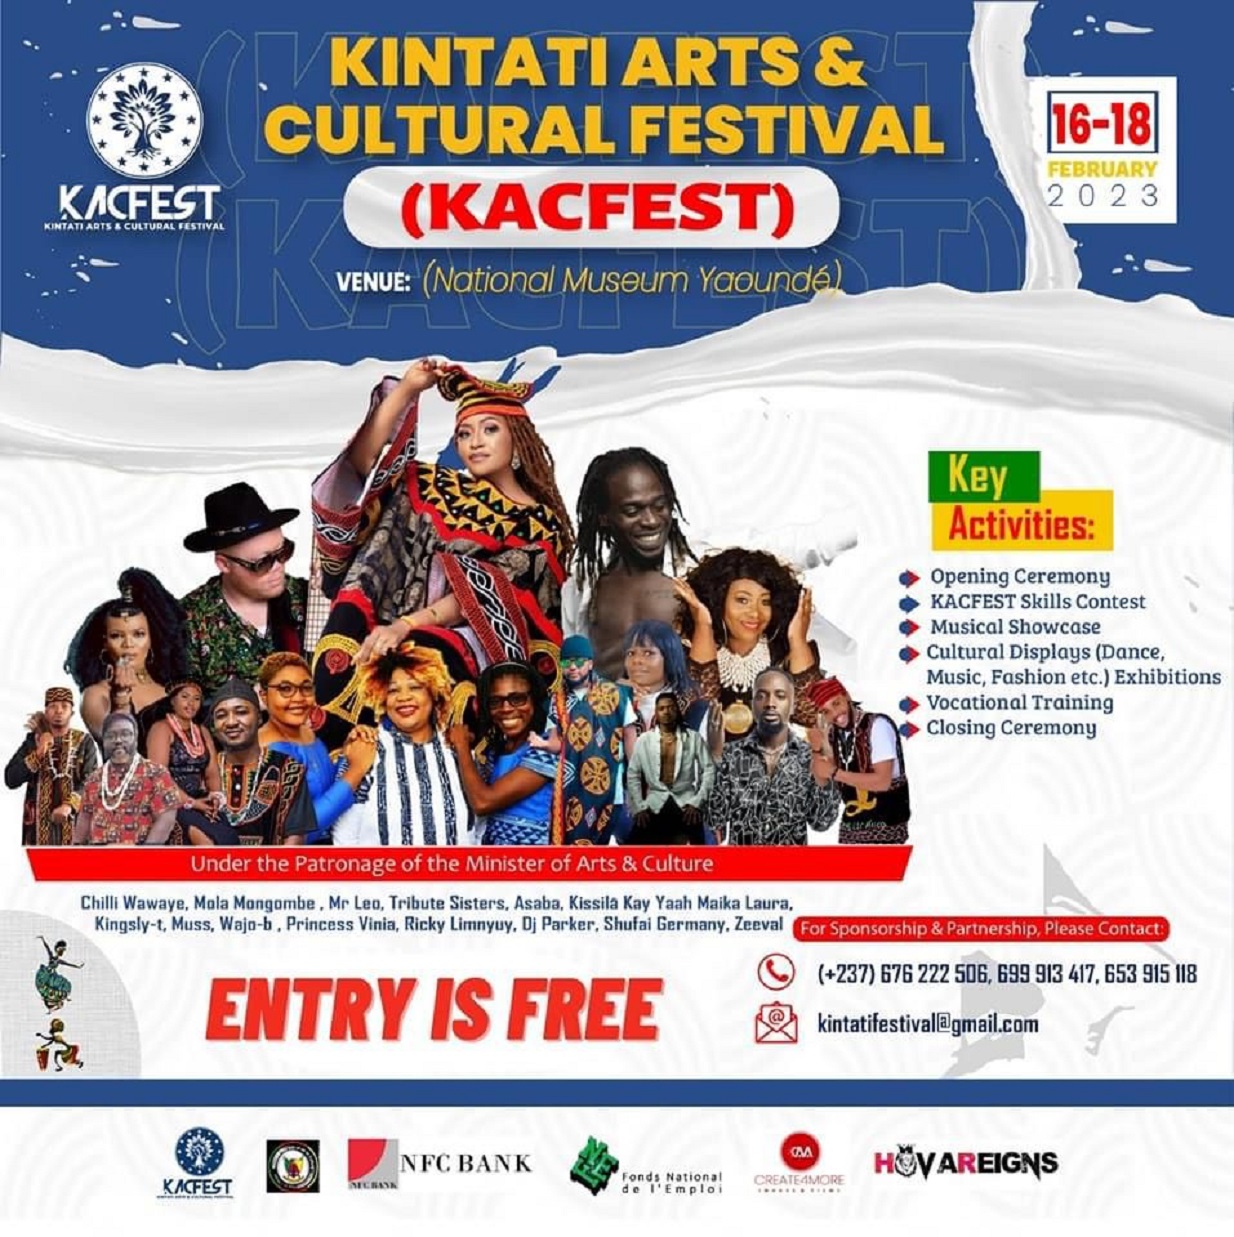 Mr. Leo Among To Performers At Kintati Arts & Cultural Festival in Yaoundé